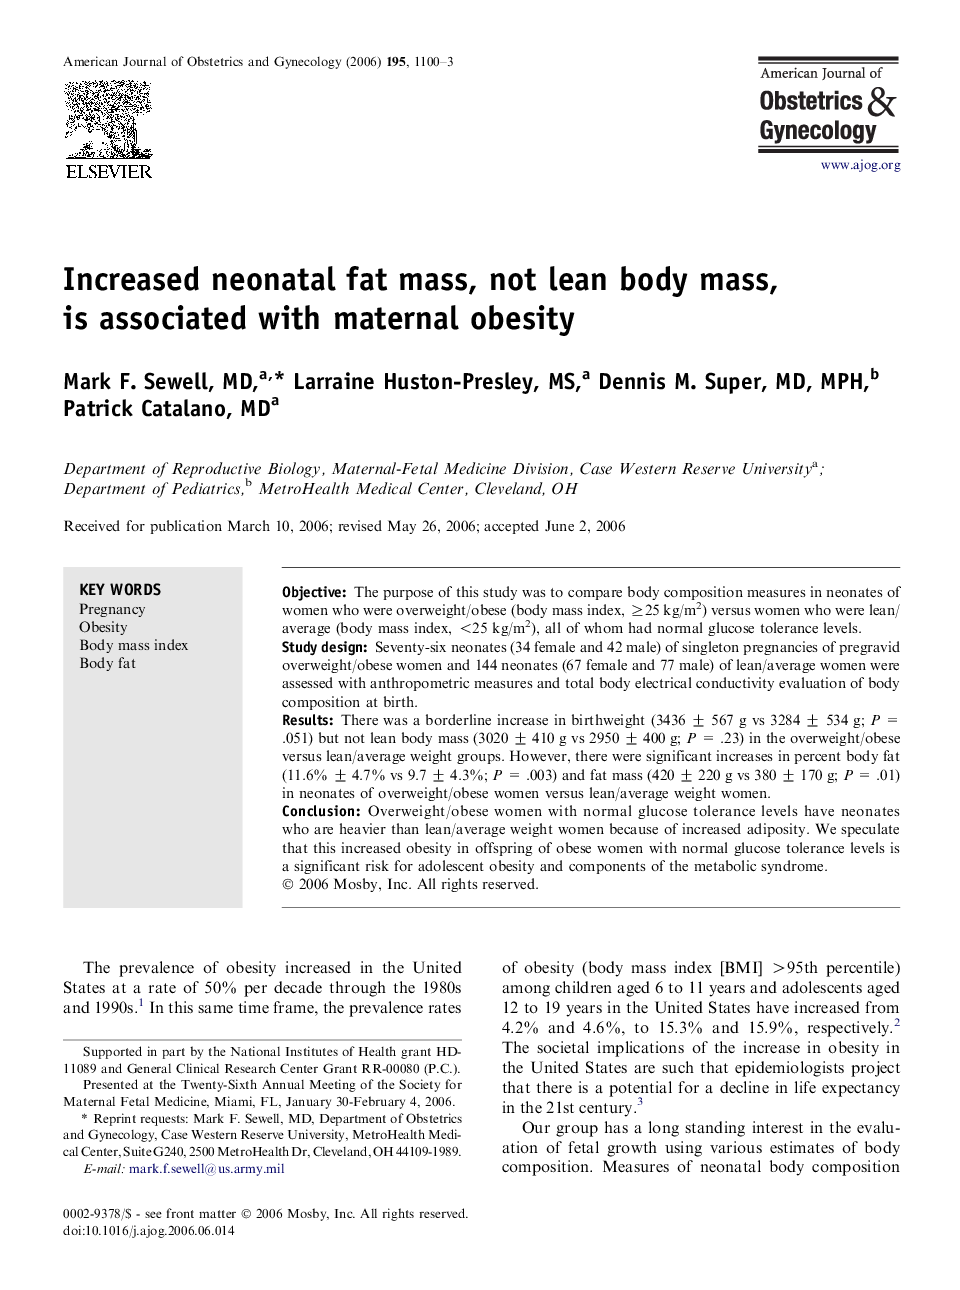 Increased neonatal fat mass, not lean body mass, is associated with maternal obesity 